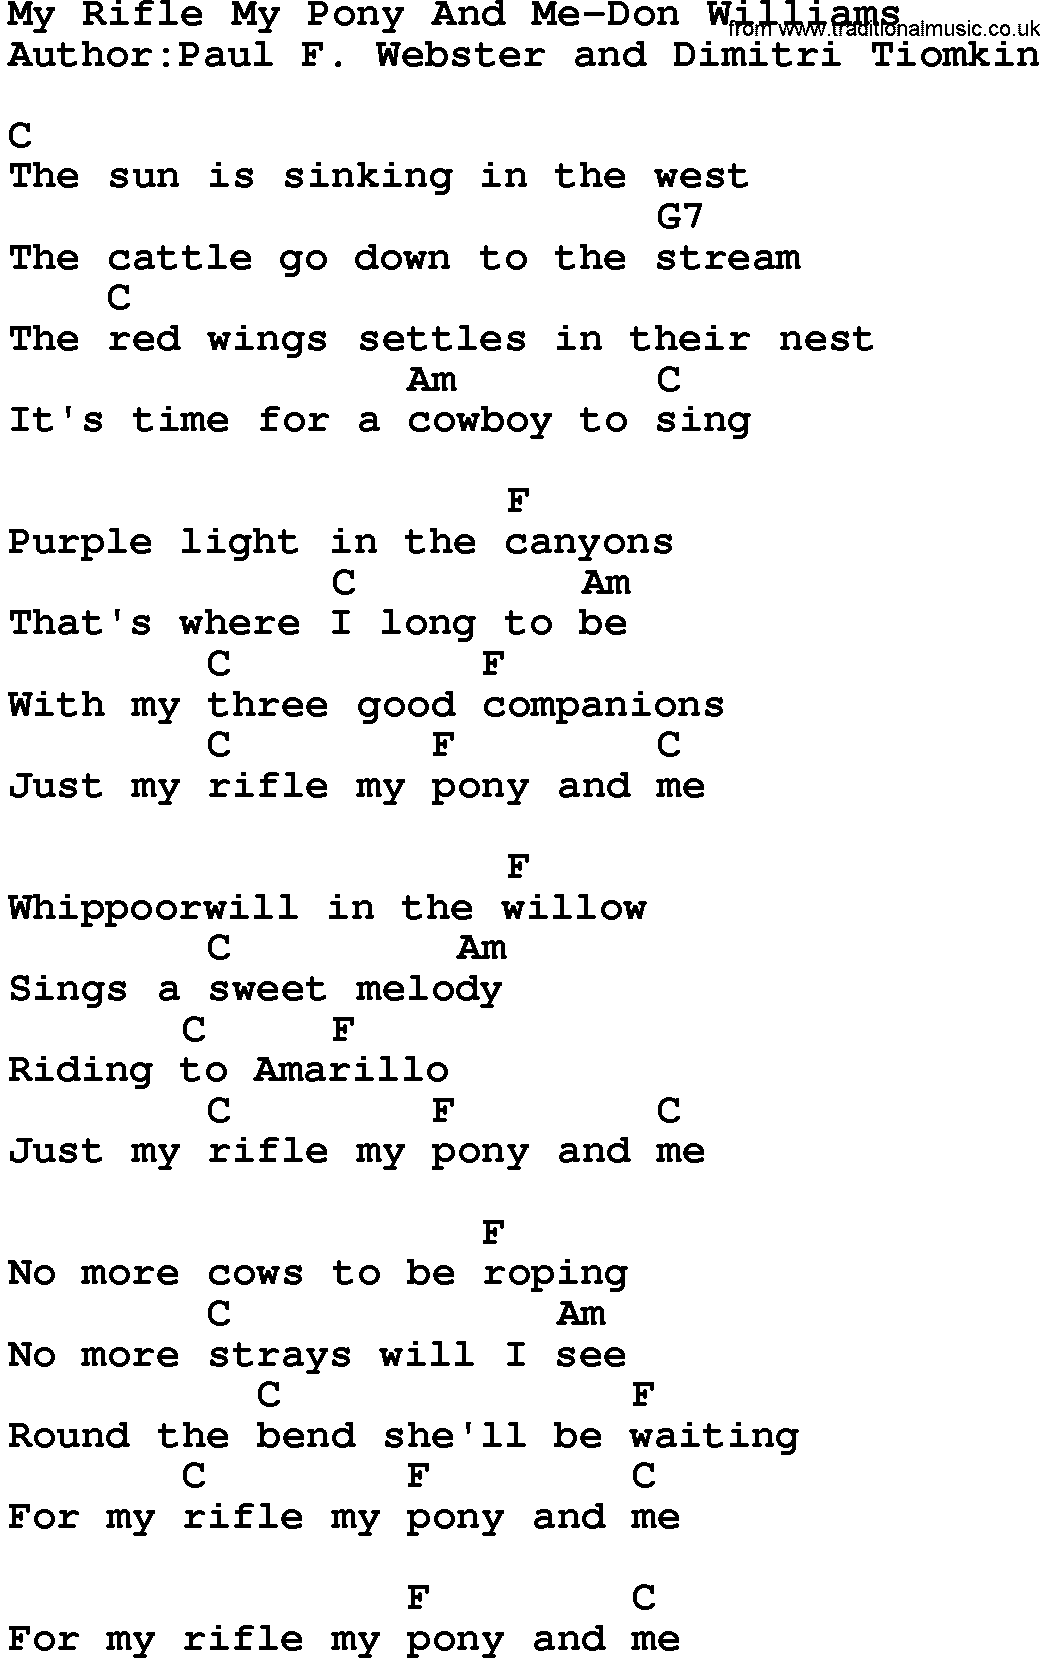 Country music song: My Rifle My Pony And Me-Don Williams lyrics and chords